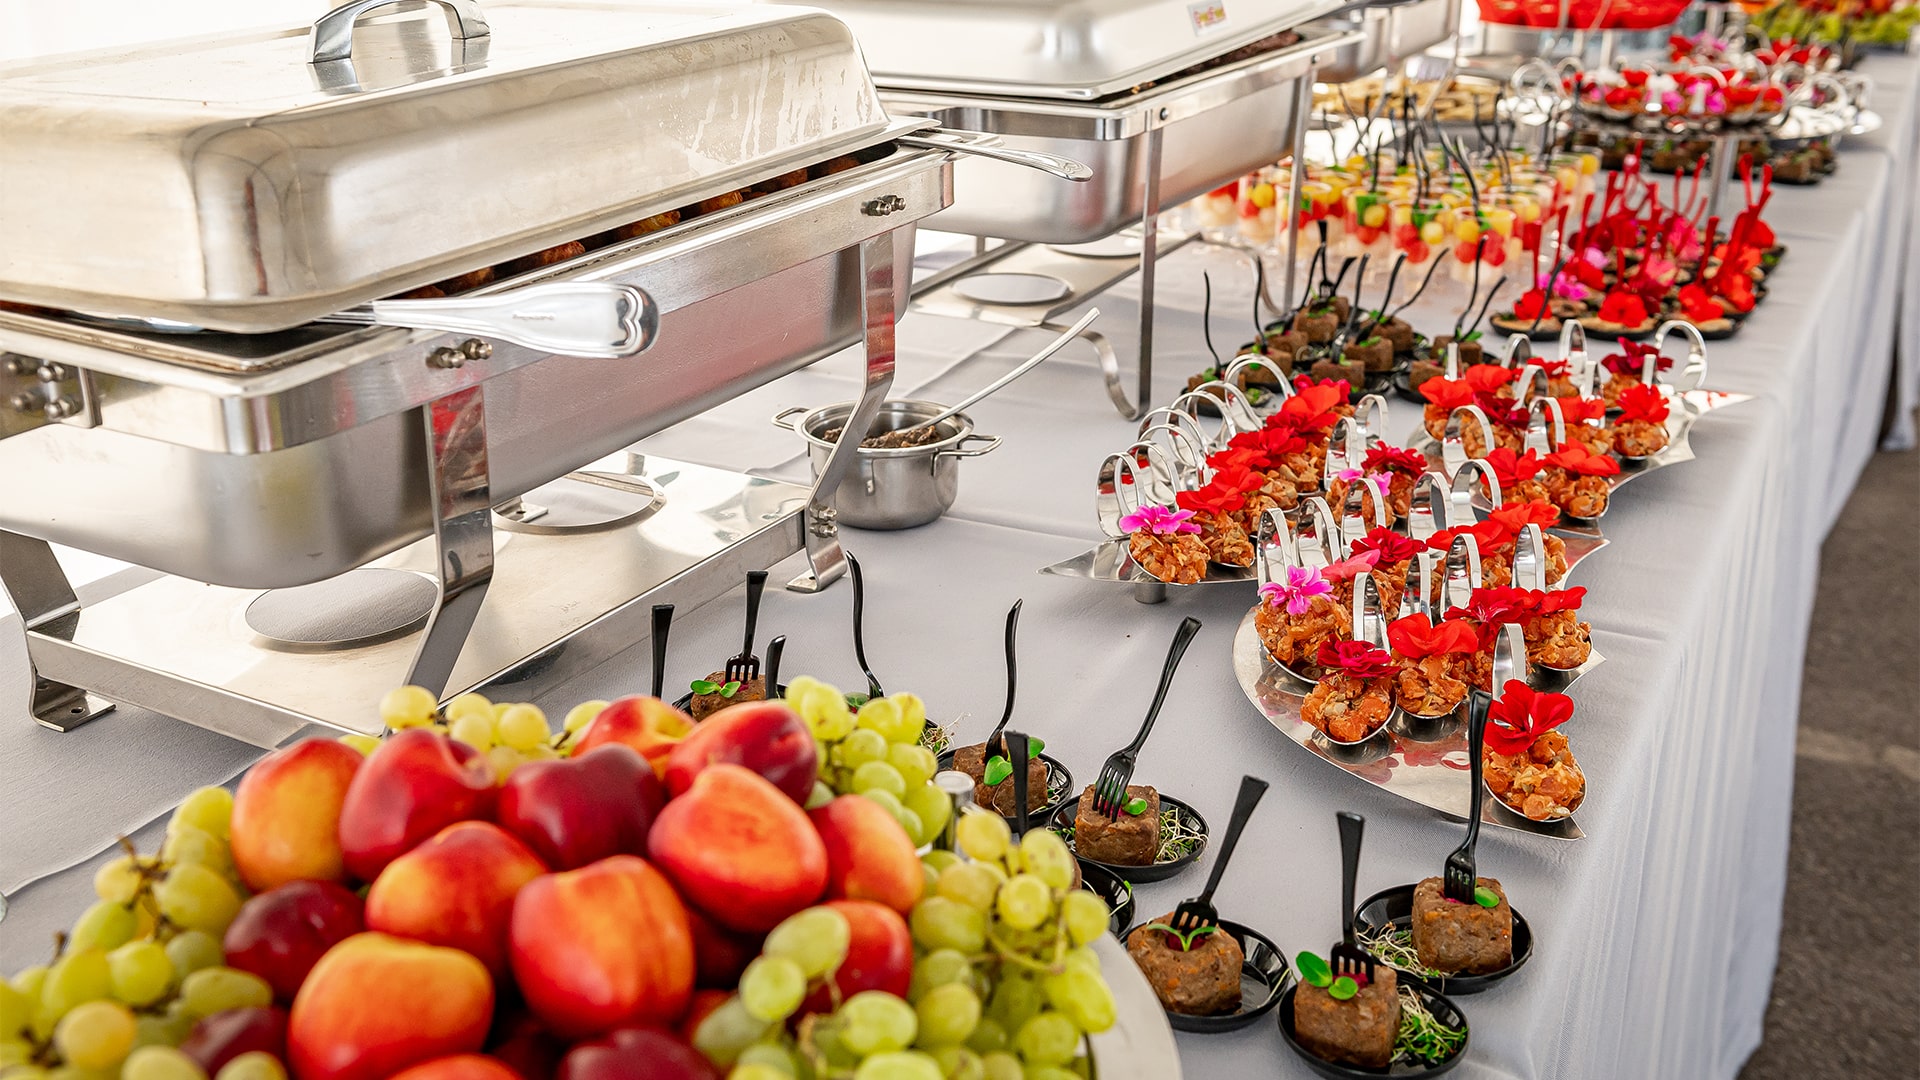 Catering Companies Specialized in Large Private Events